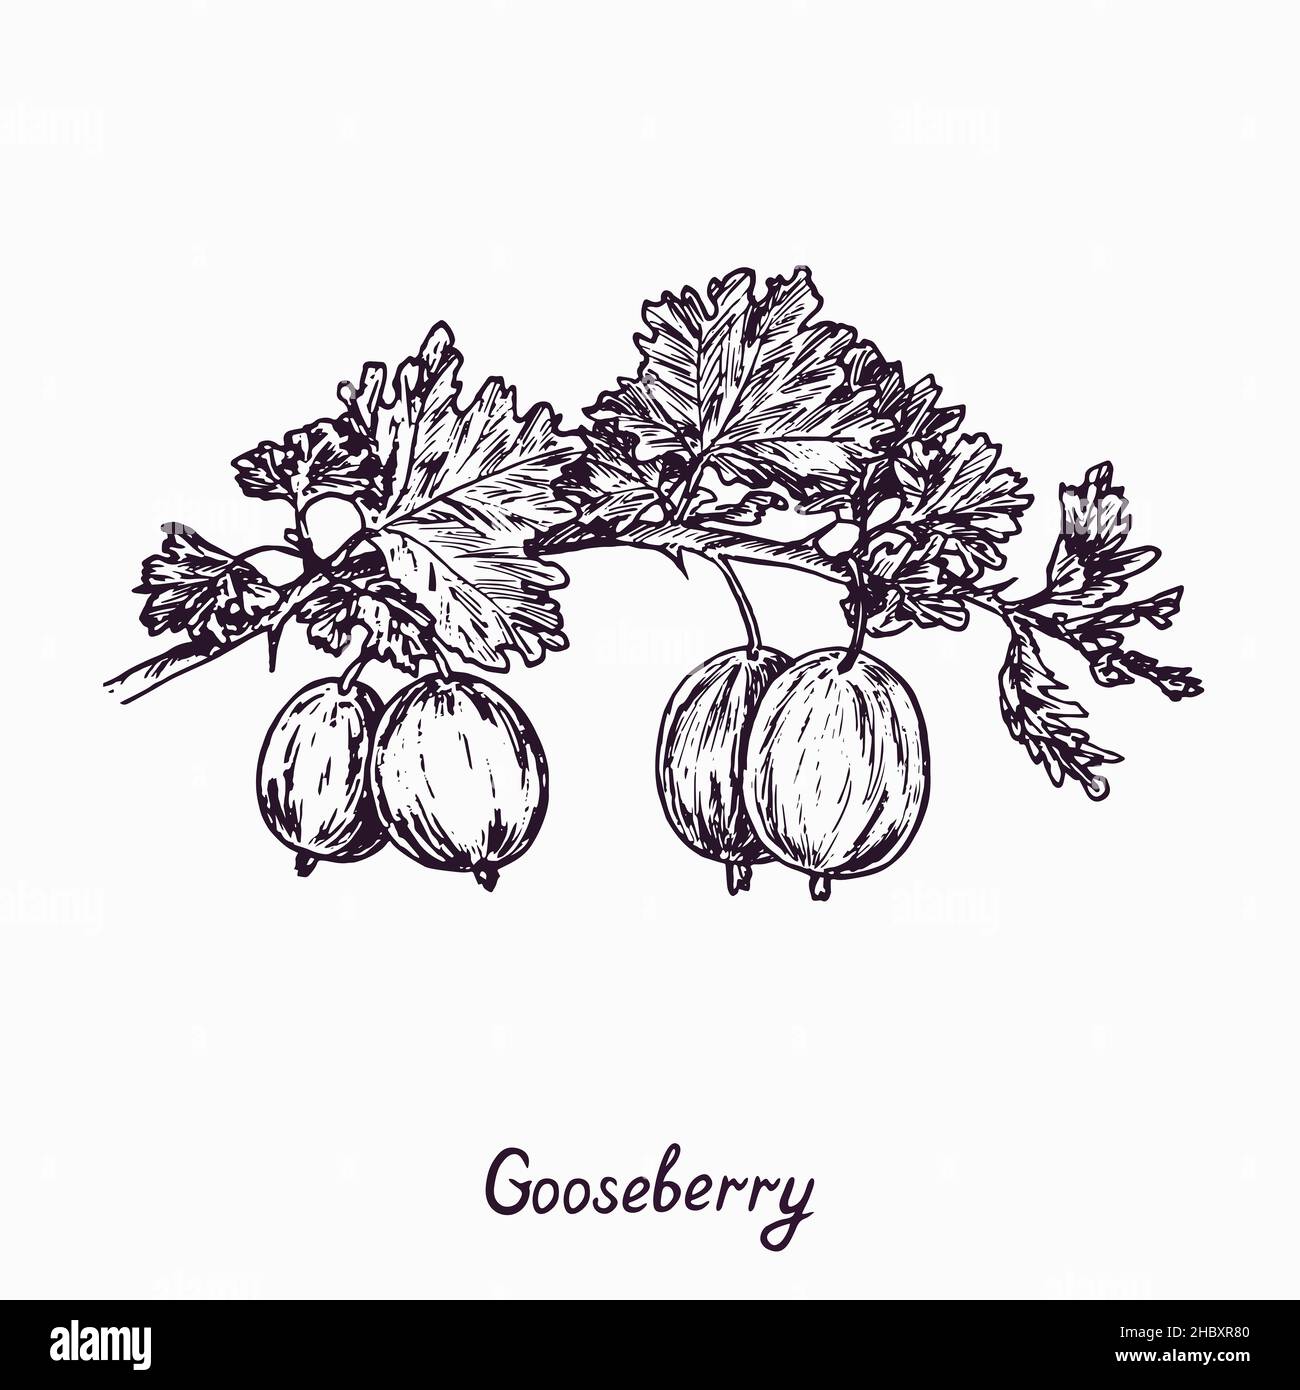 Gooseberry branch with berries and leaves, simple doodle drawing with inscription, gravure style Stock Photo